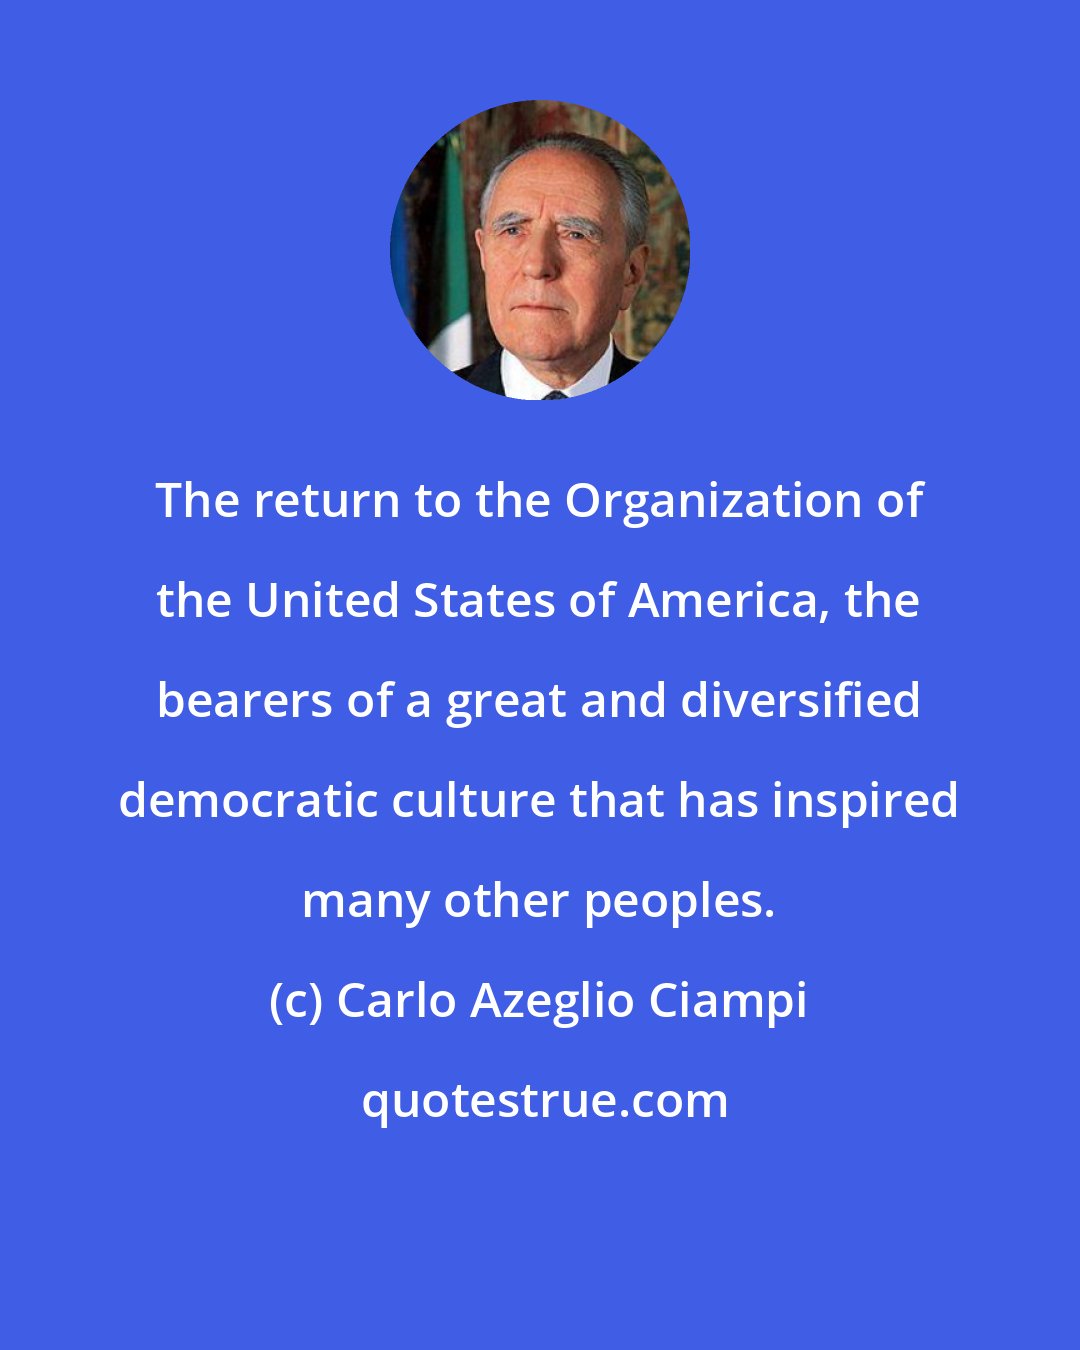 Carlo Azeglio Ciampi: The return to the Organization of the United States of America, the bearers of a great and diversified democratic culture that has inspired many other peoples.